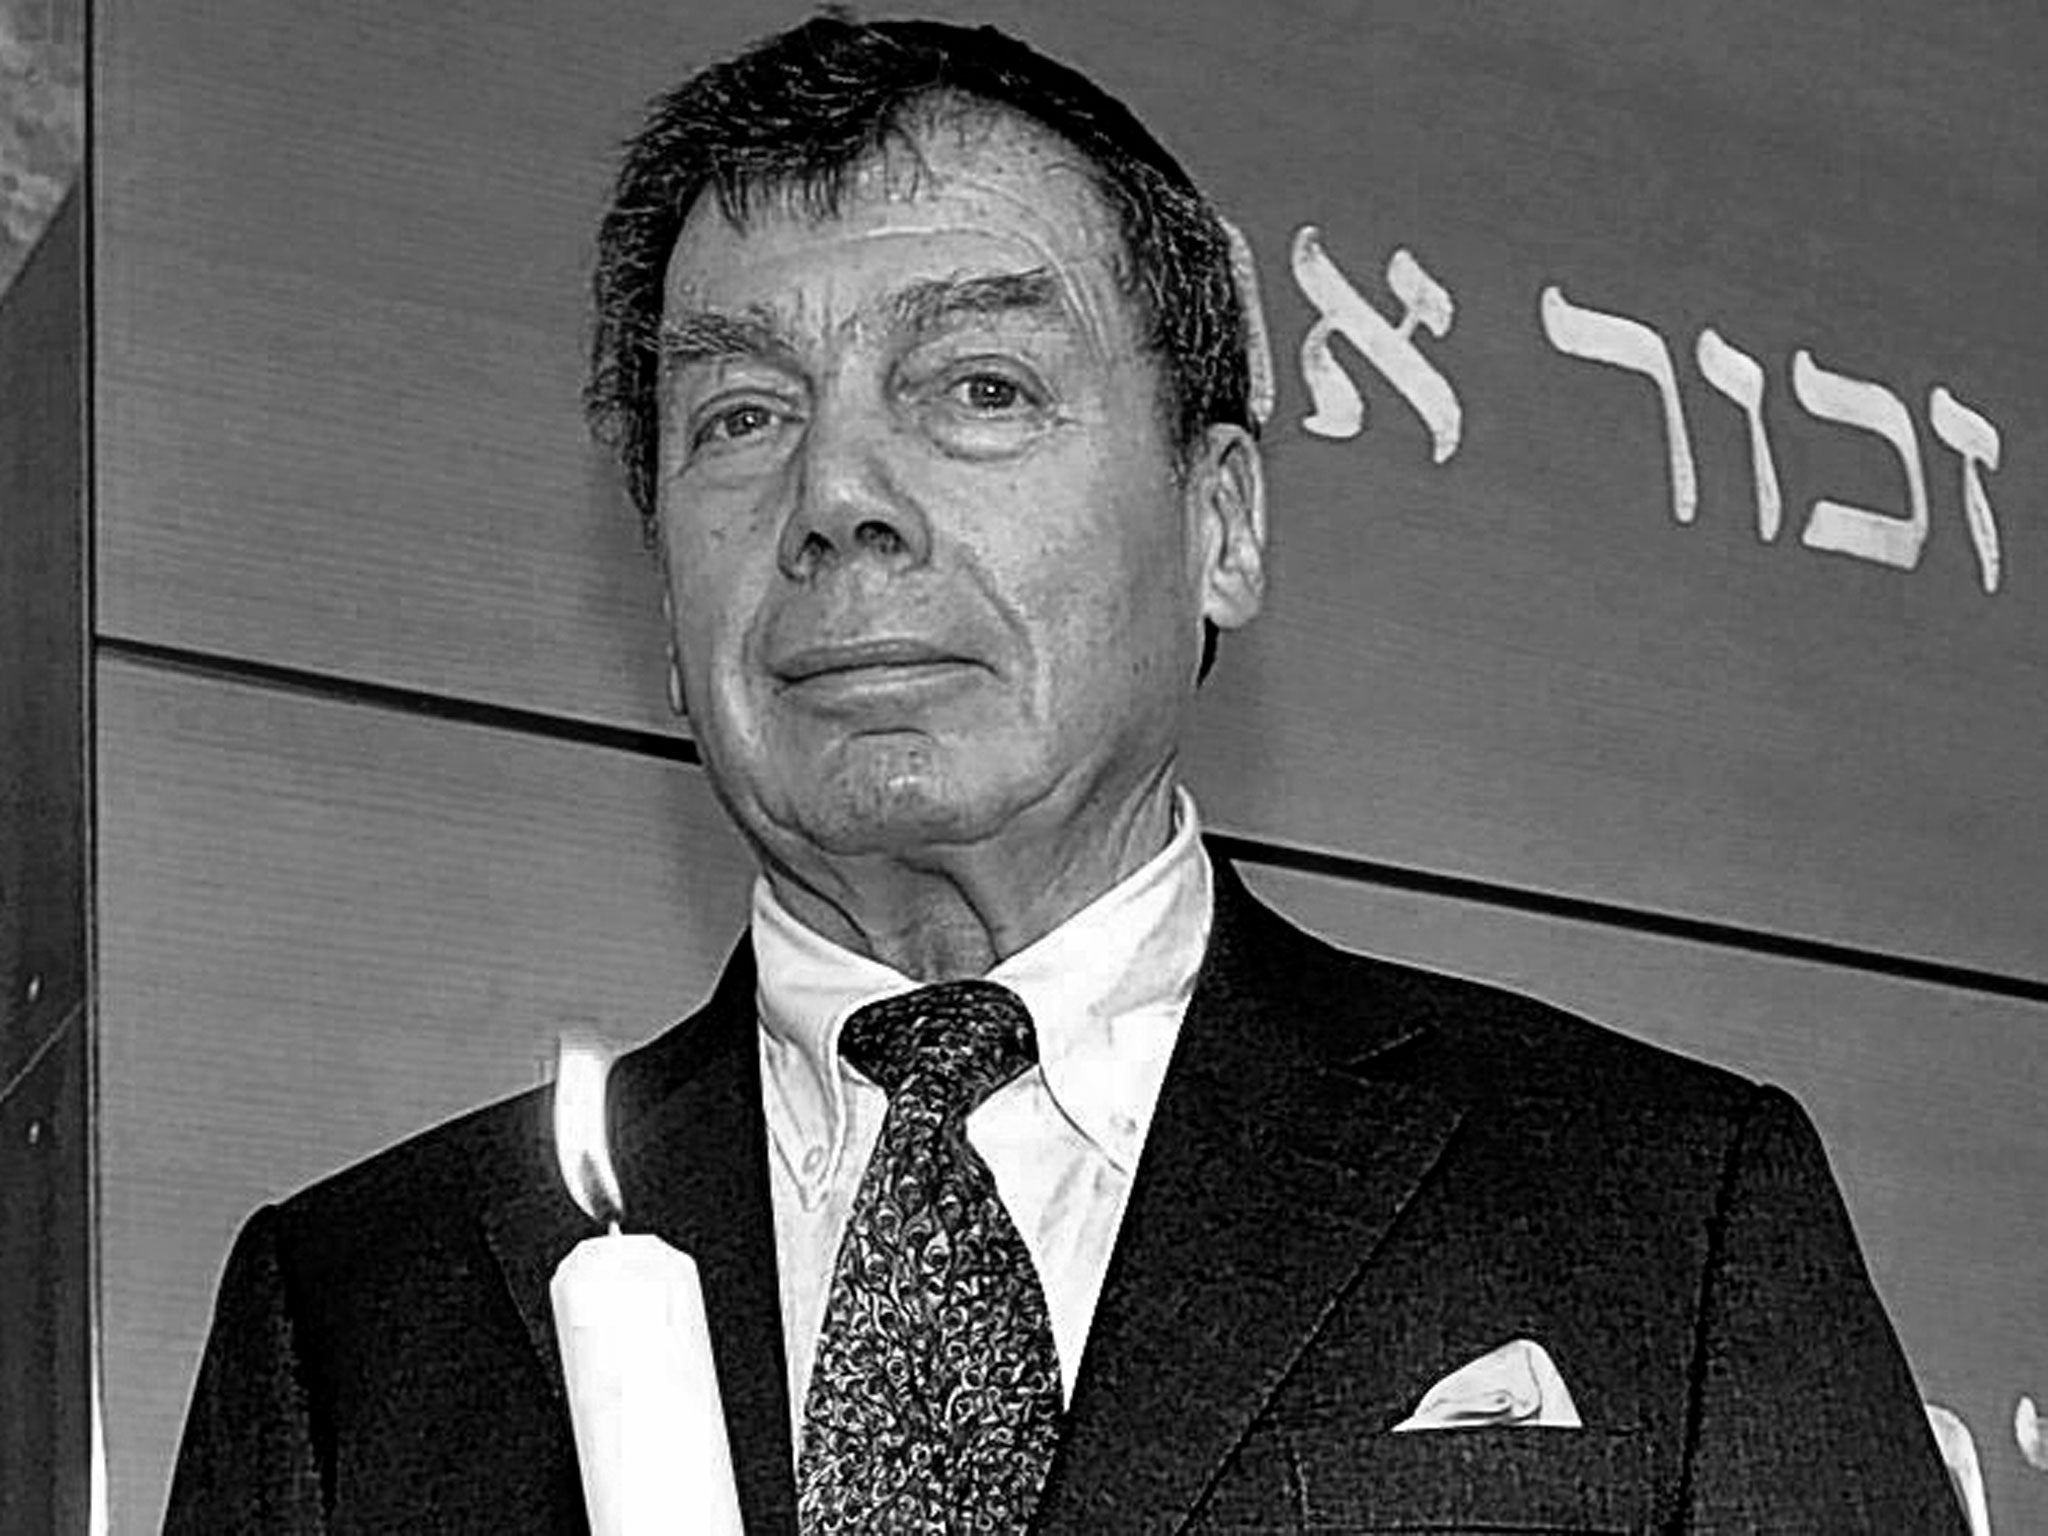 Bronfman in 2006, at the opening of a new main synagogue in Munich